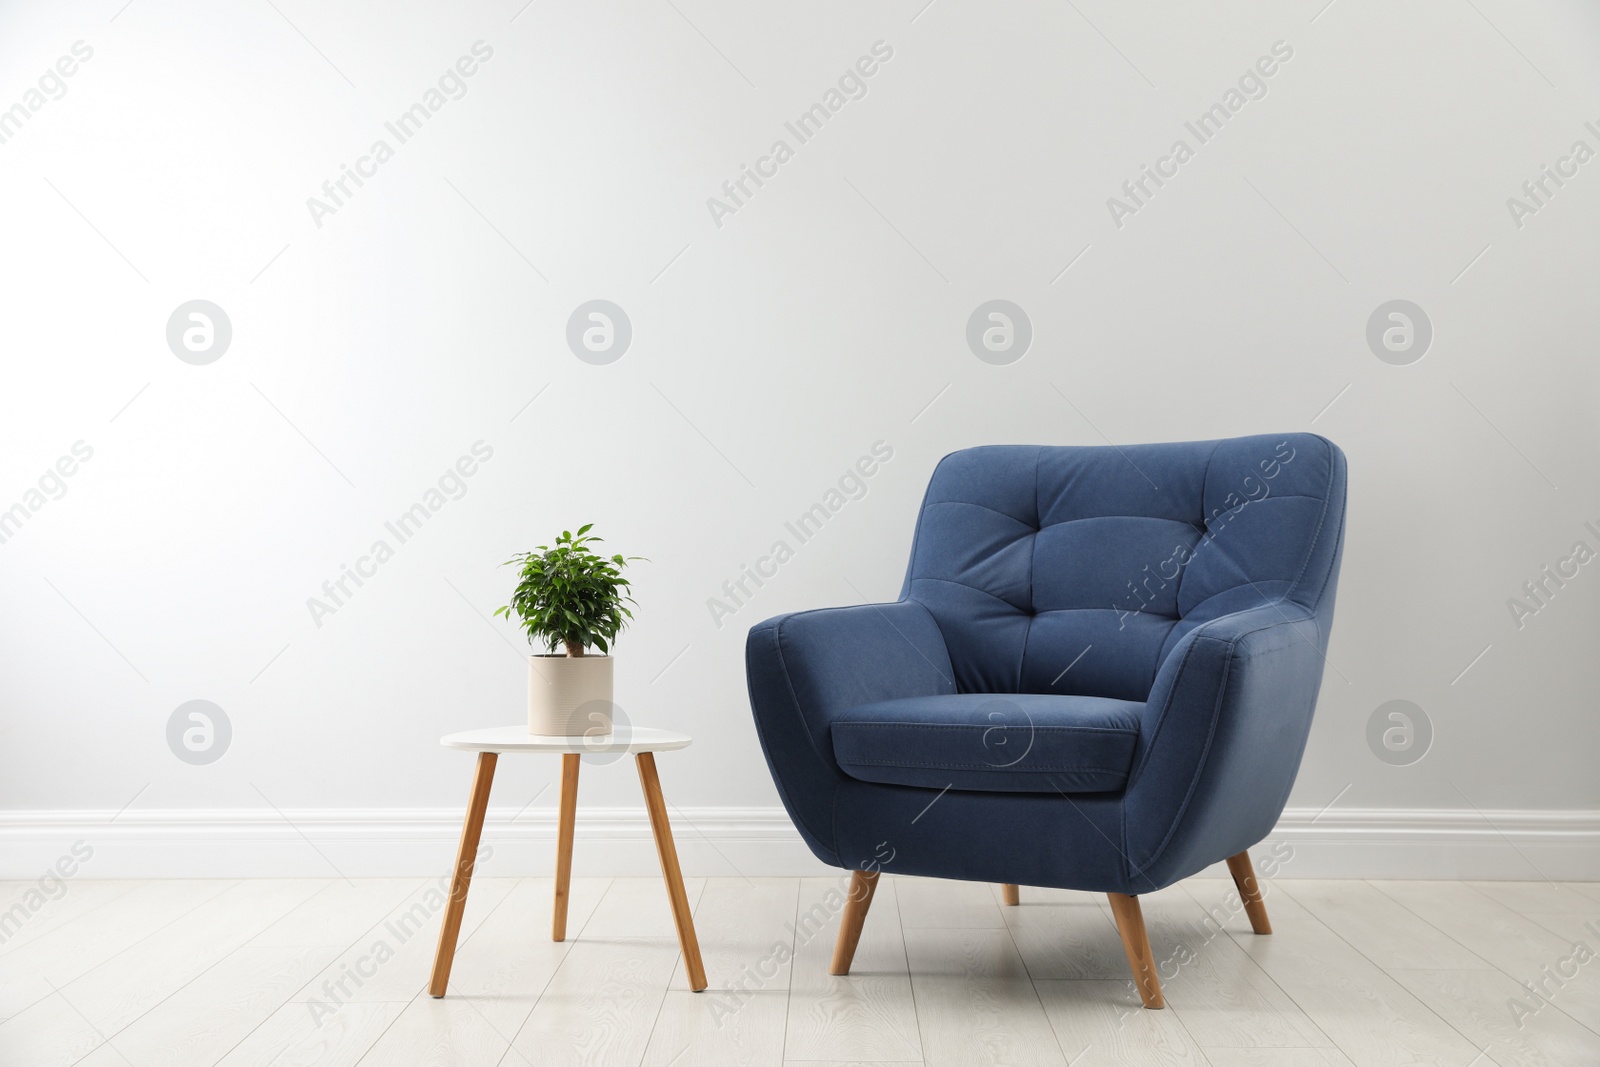 Photo of Stylish armchair and table with houseplant near white wall. Interior design